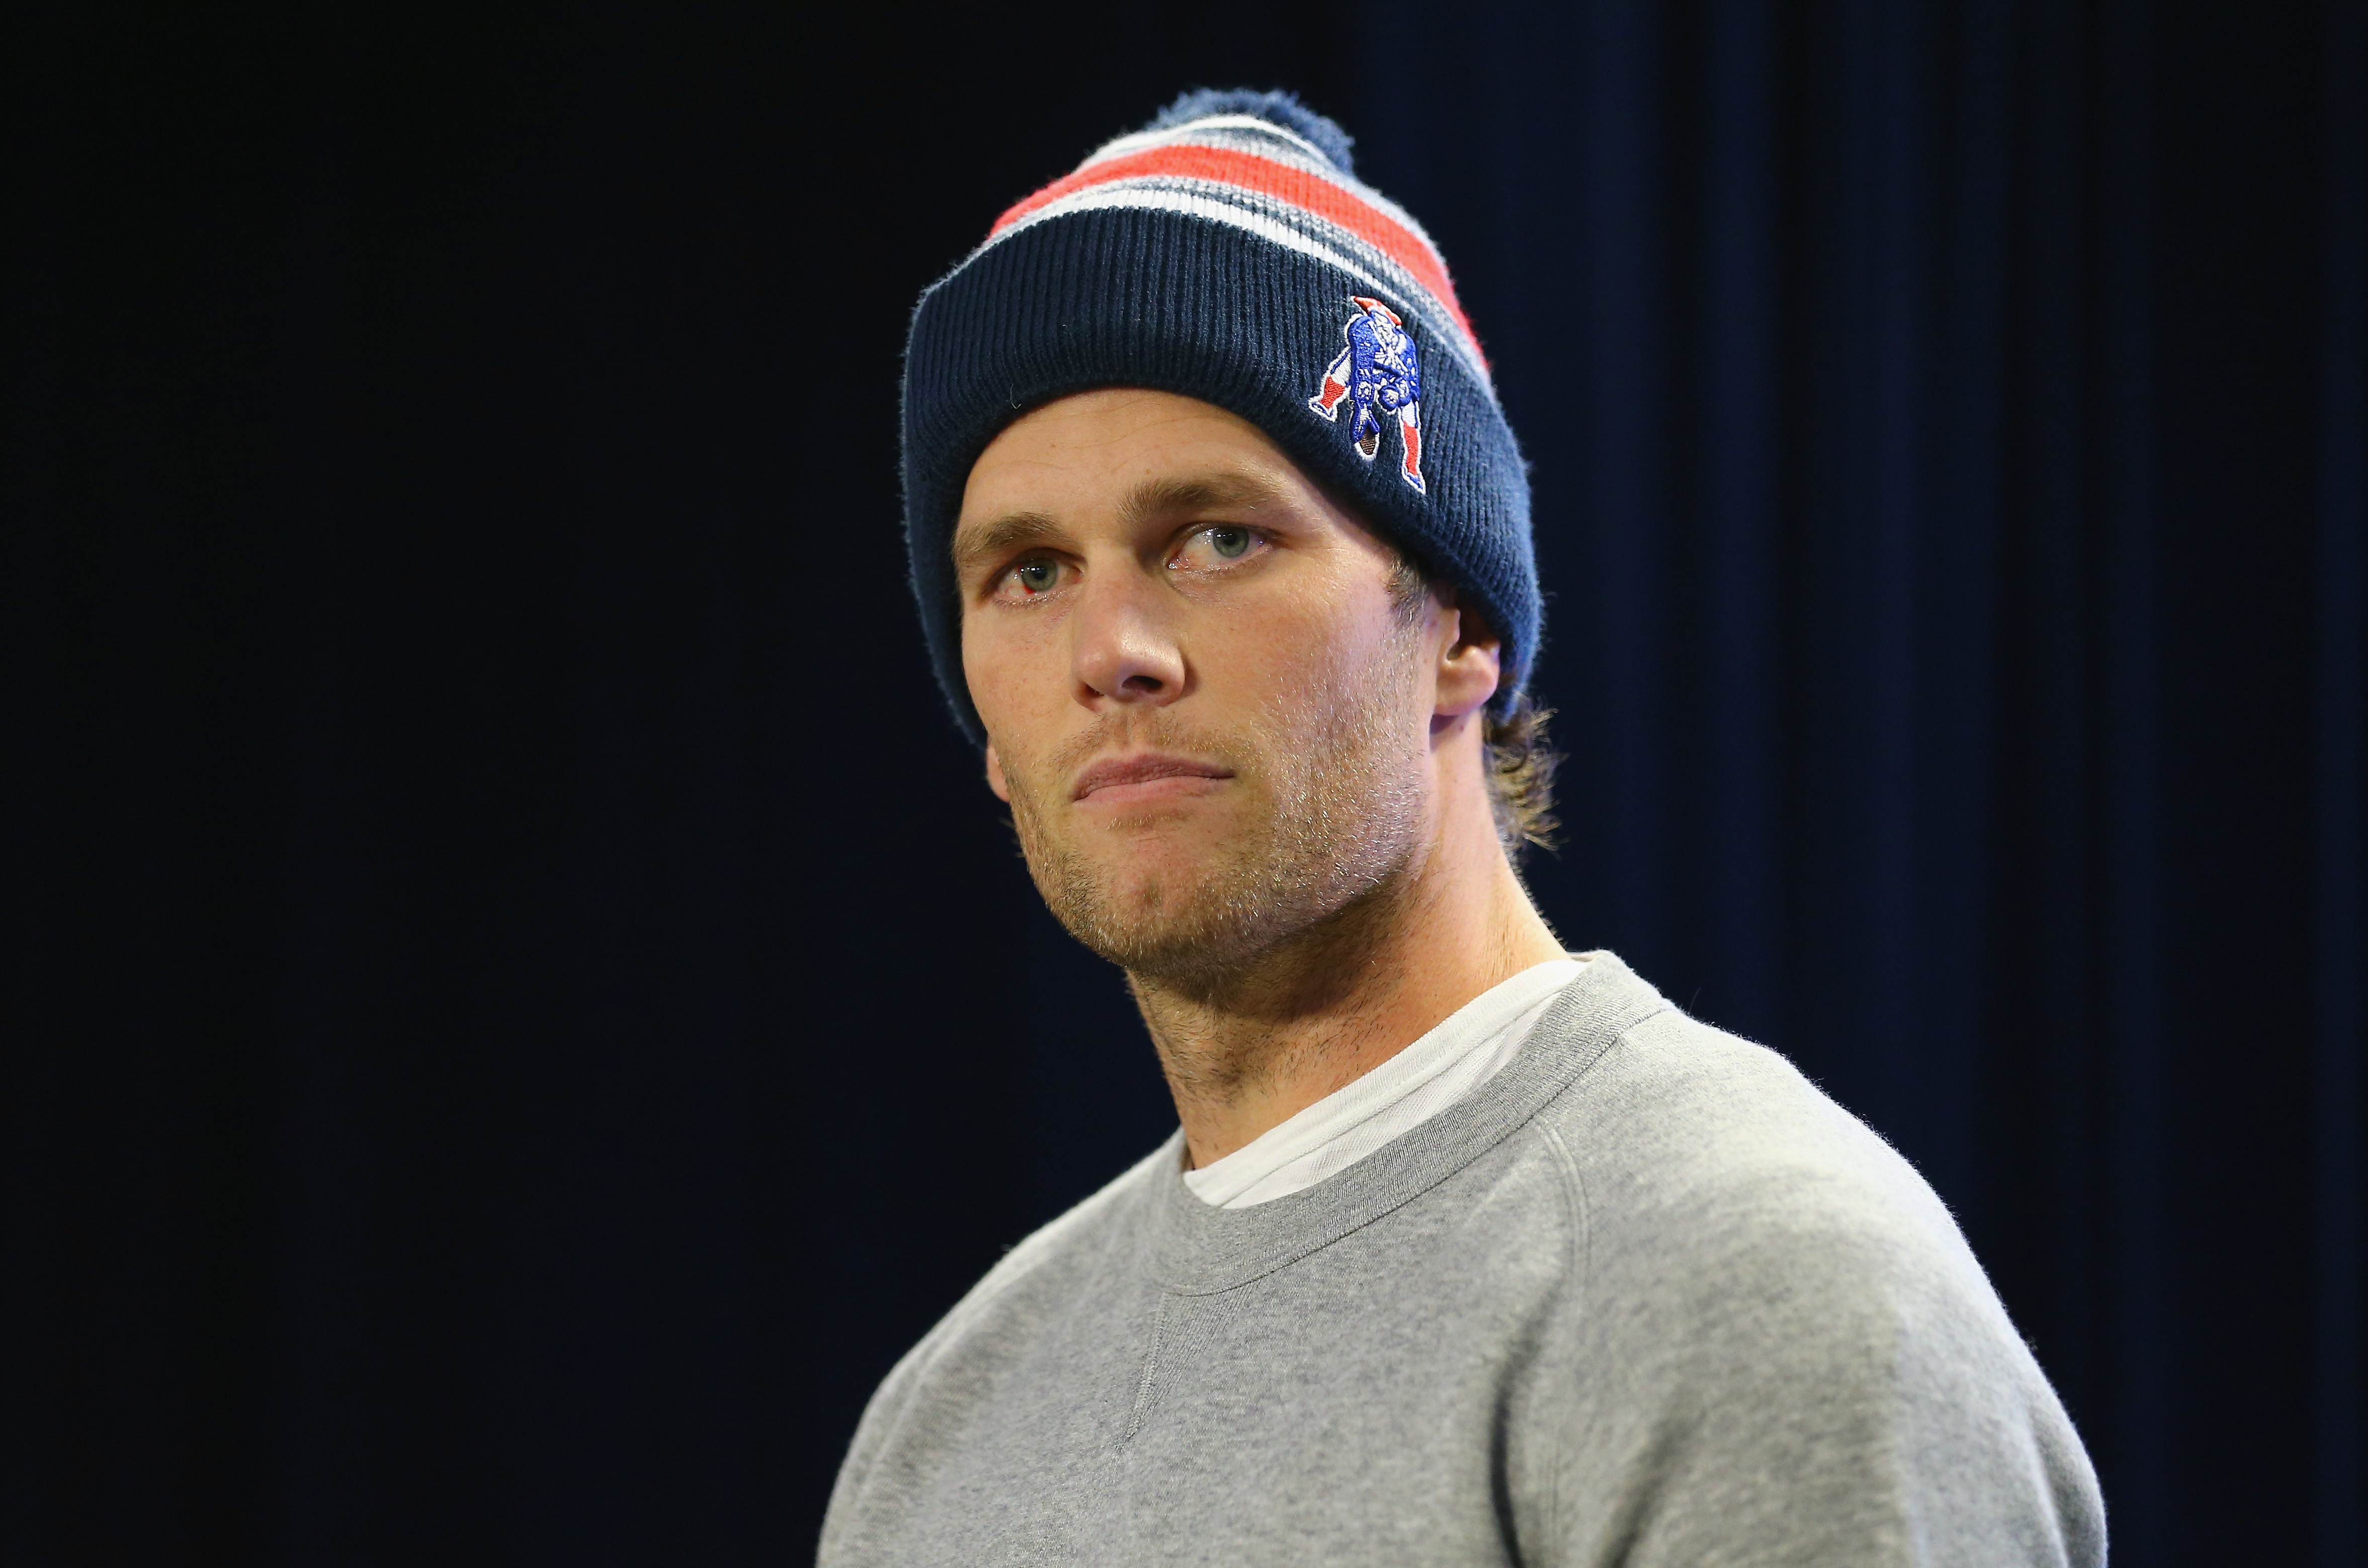 New England Patriots Quarterback Tom Brady talks to the media during a press conference to address the under inflation of footballs used in the AFC championship game at Gillette Stadium on January 22, 2015 in Foxboro, Massachusetts.